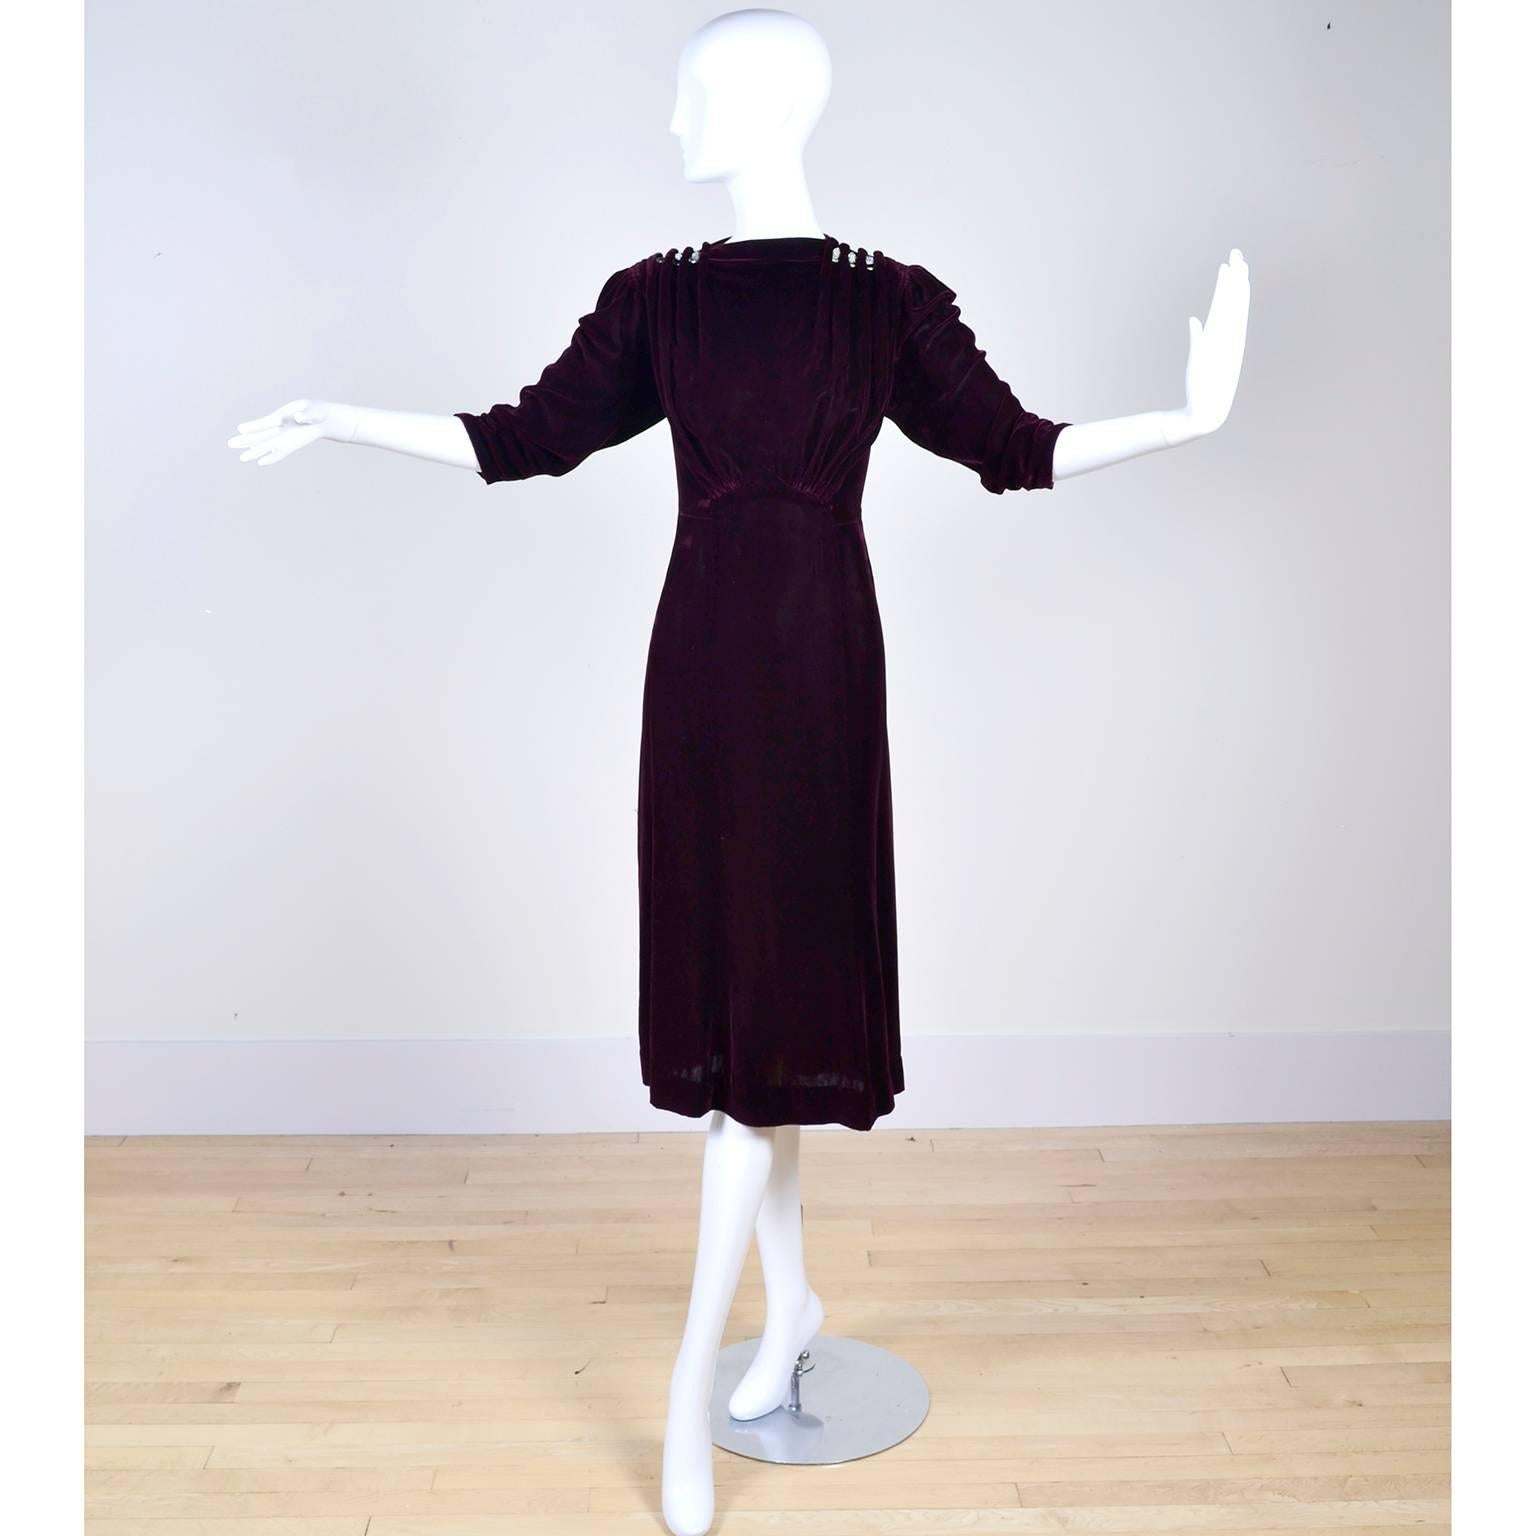 This ultra luxe deep burgundy silk or rayon velvet dress was purchased at Alexander's Women's Apparel in Spokane Washington in the 1930's.  The dress has rhinestone dress clips built into the gathered shoulders, gathered sleeves and a side and back